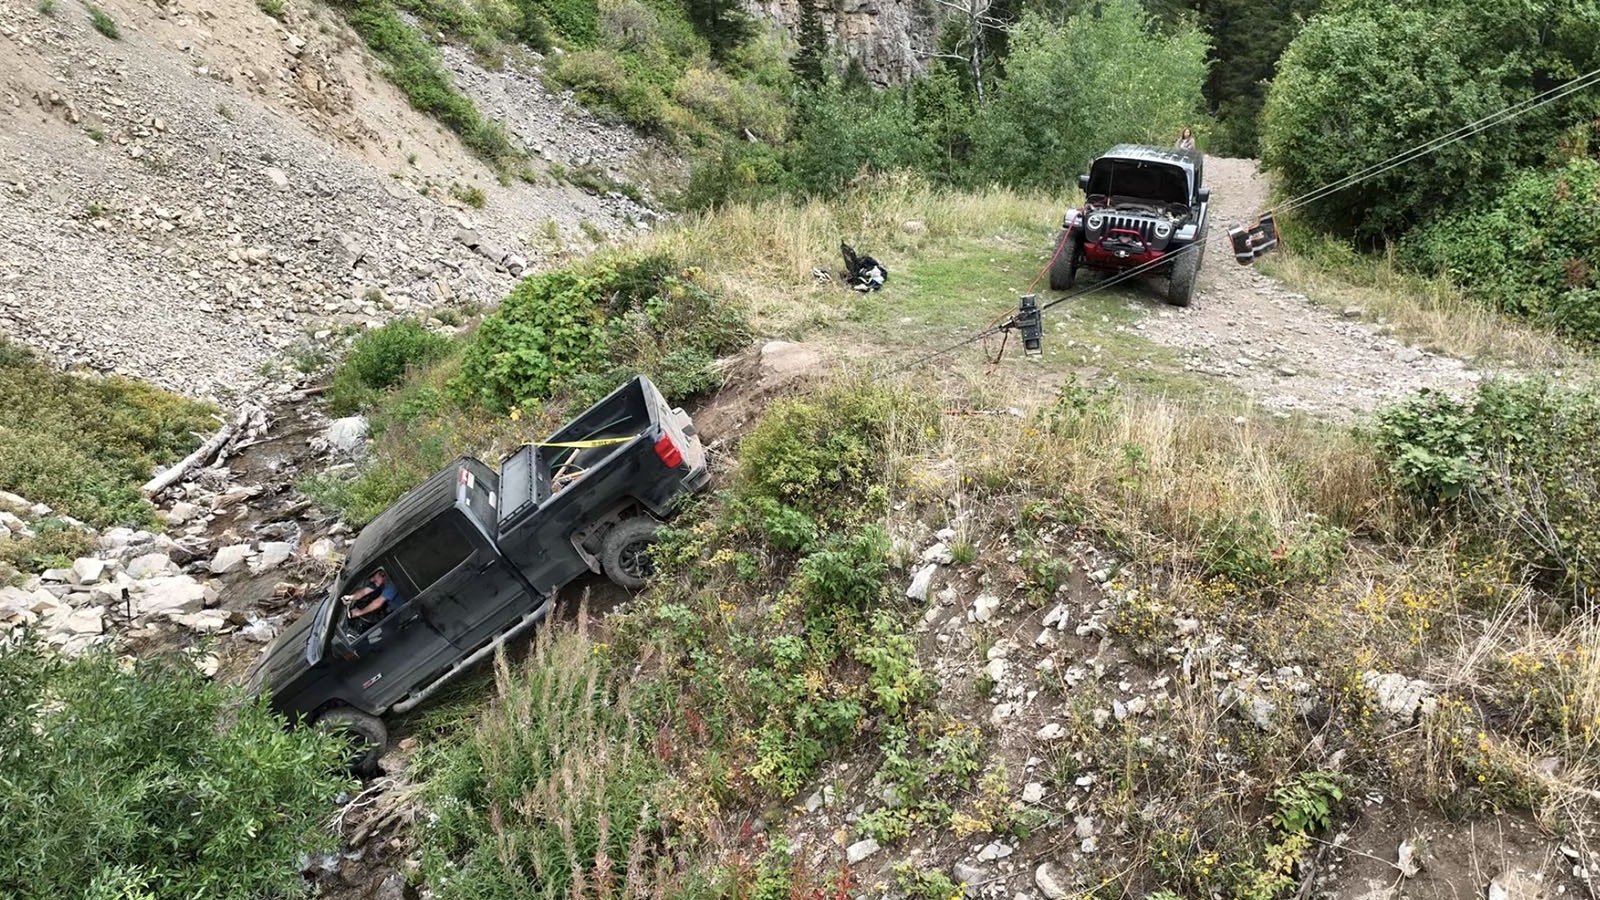 Redneck Rescue in Alpine commonly uses pulleys and snatch blocks to rescue vehicles from out-of-the-way places around Wyoming.